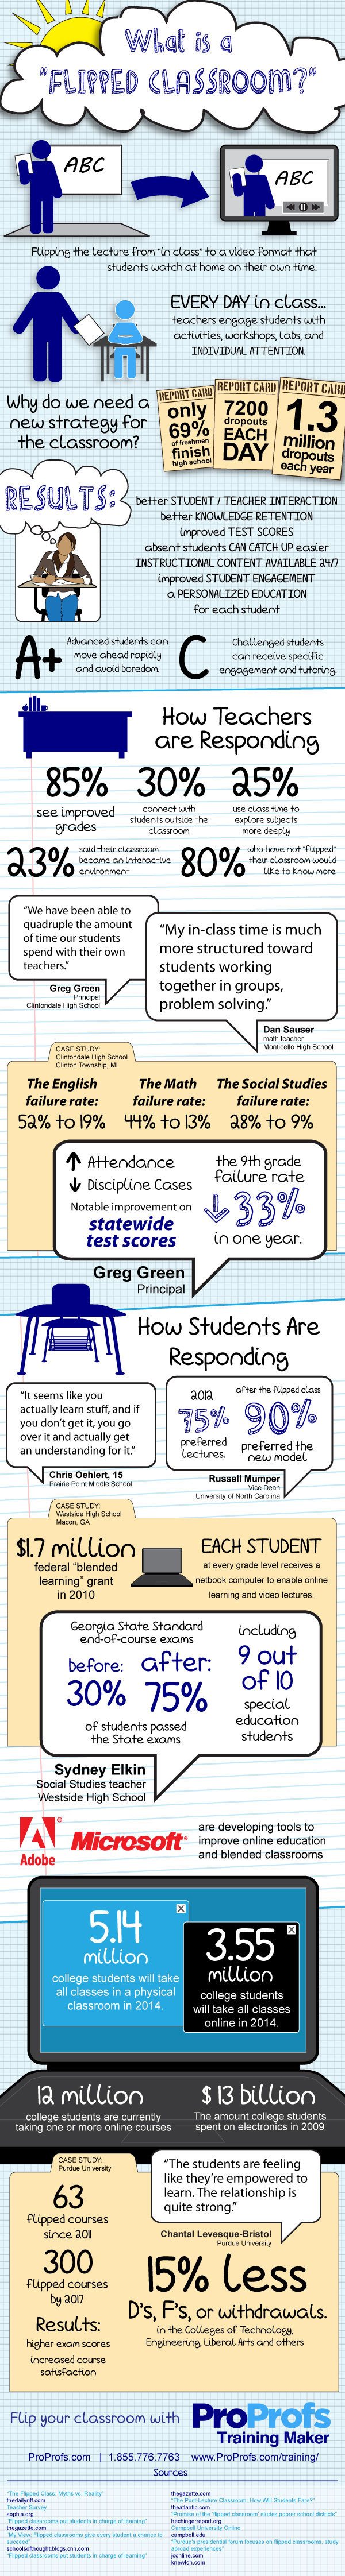 What-is-a-Flipped-Classroom-Infographic